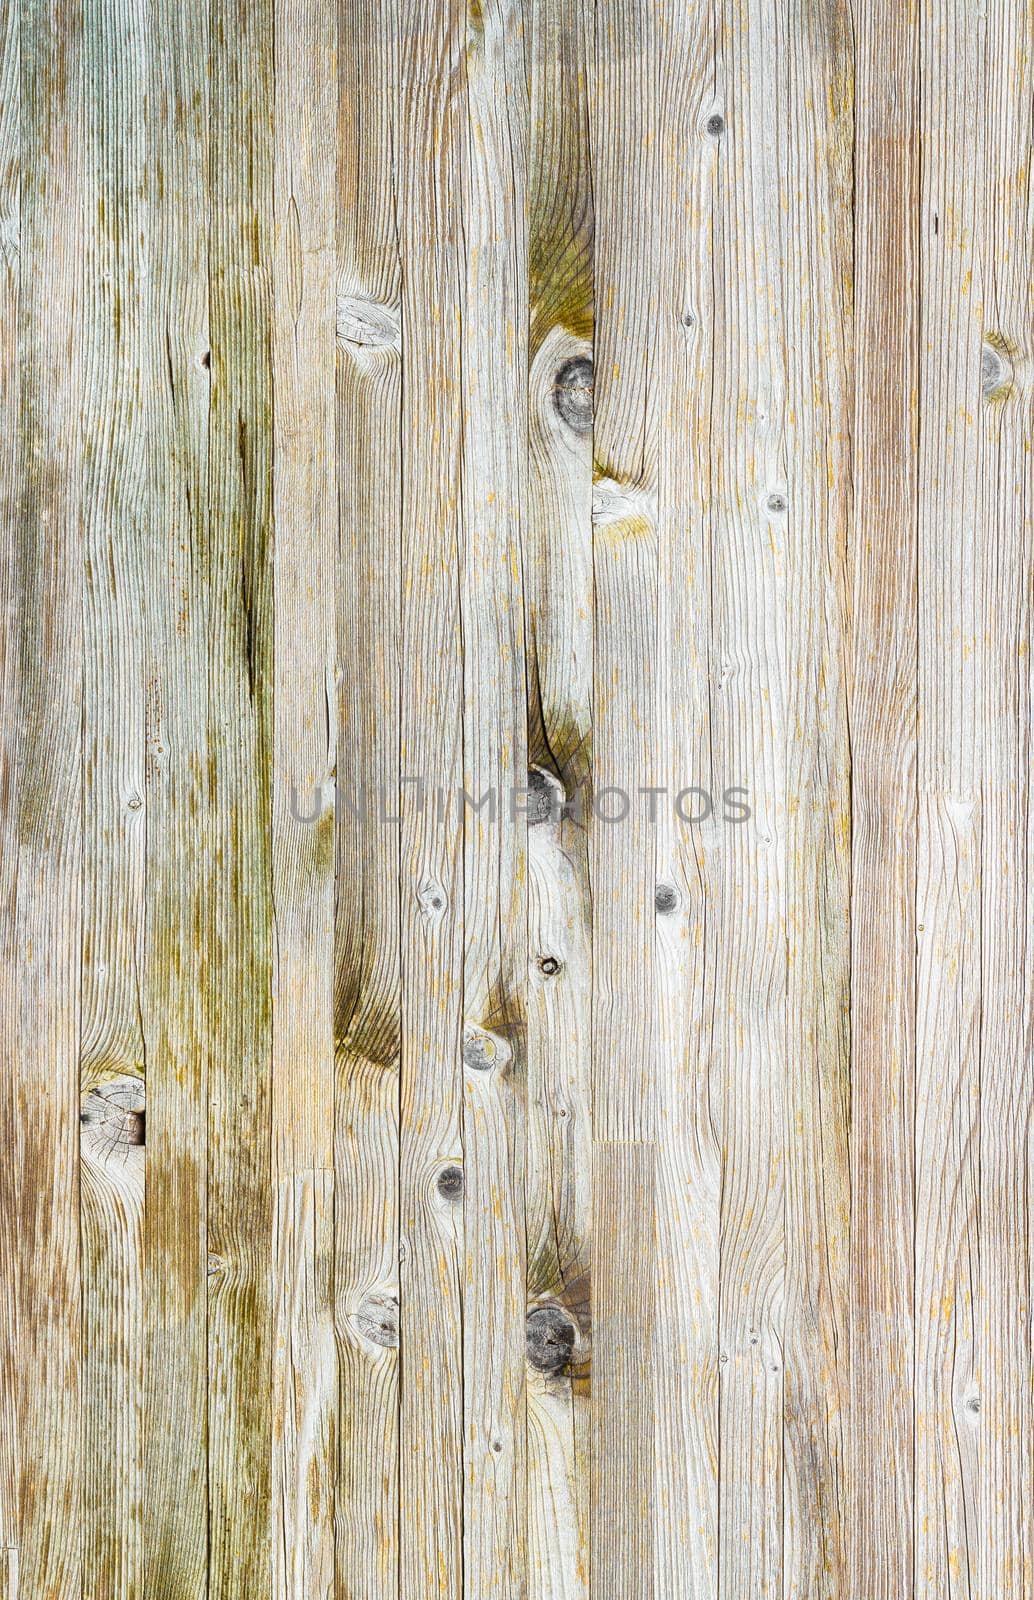 Old wood background. It can be used as texture and background.